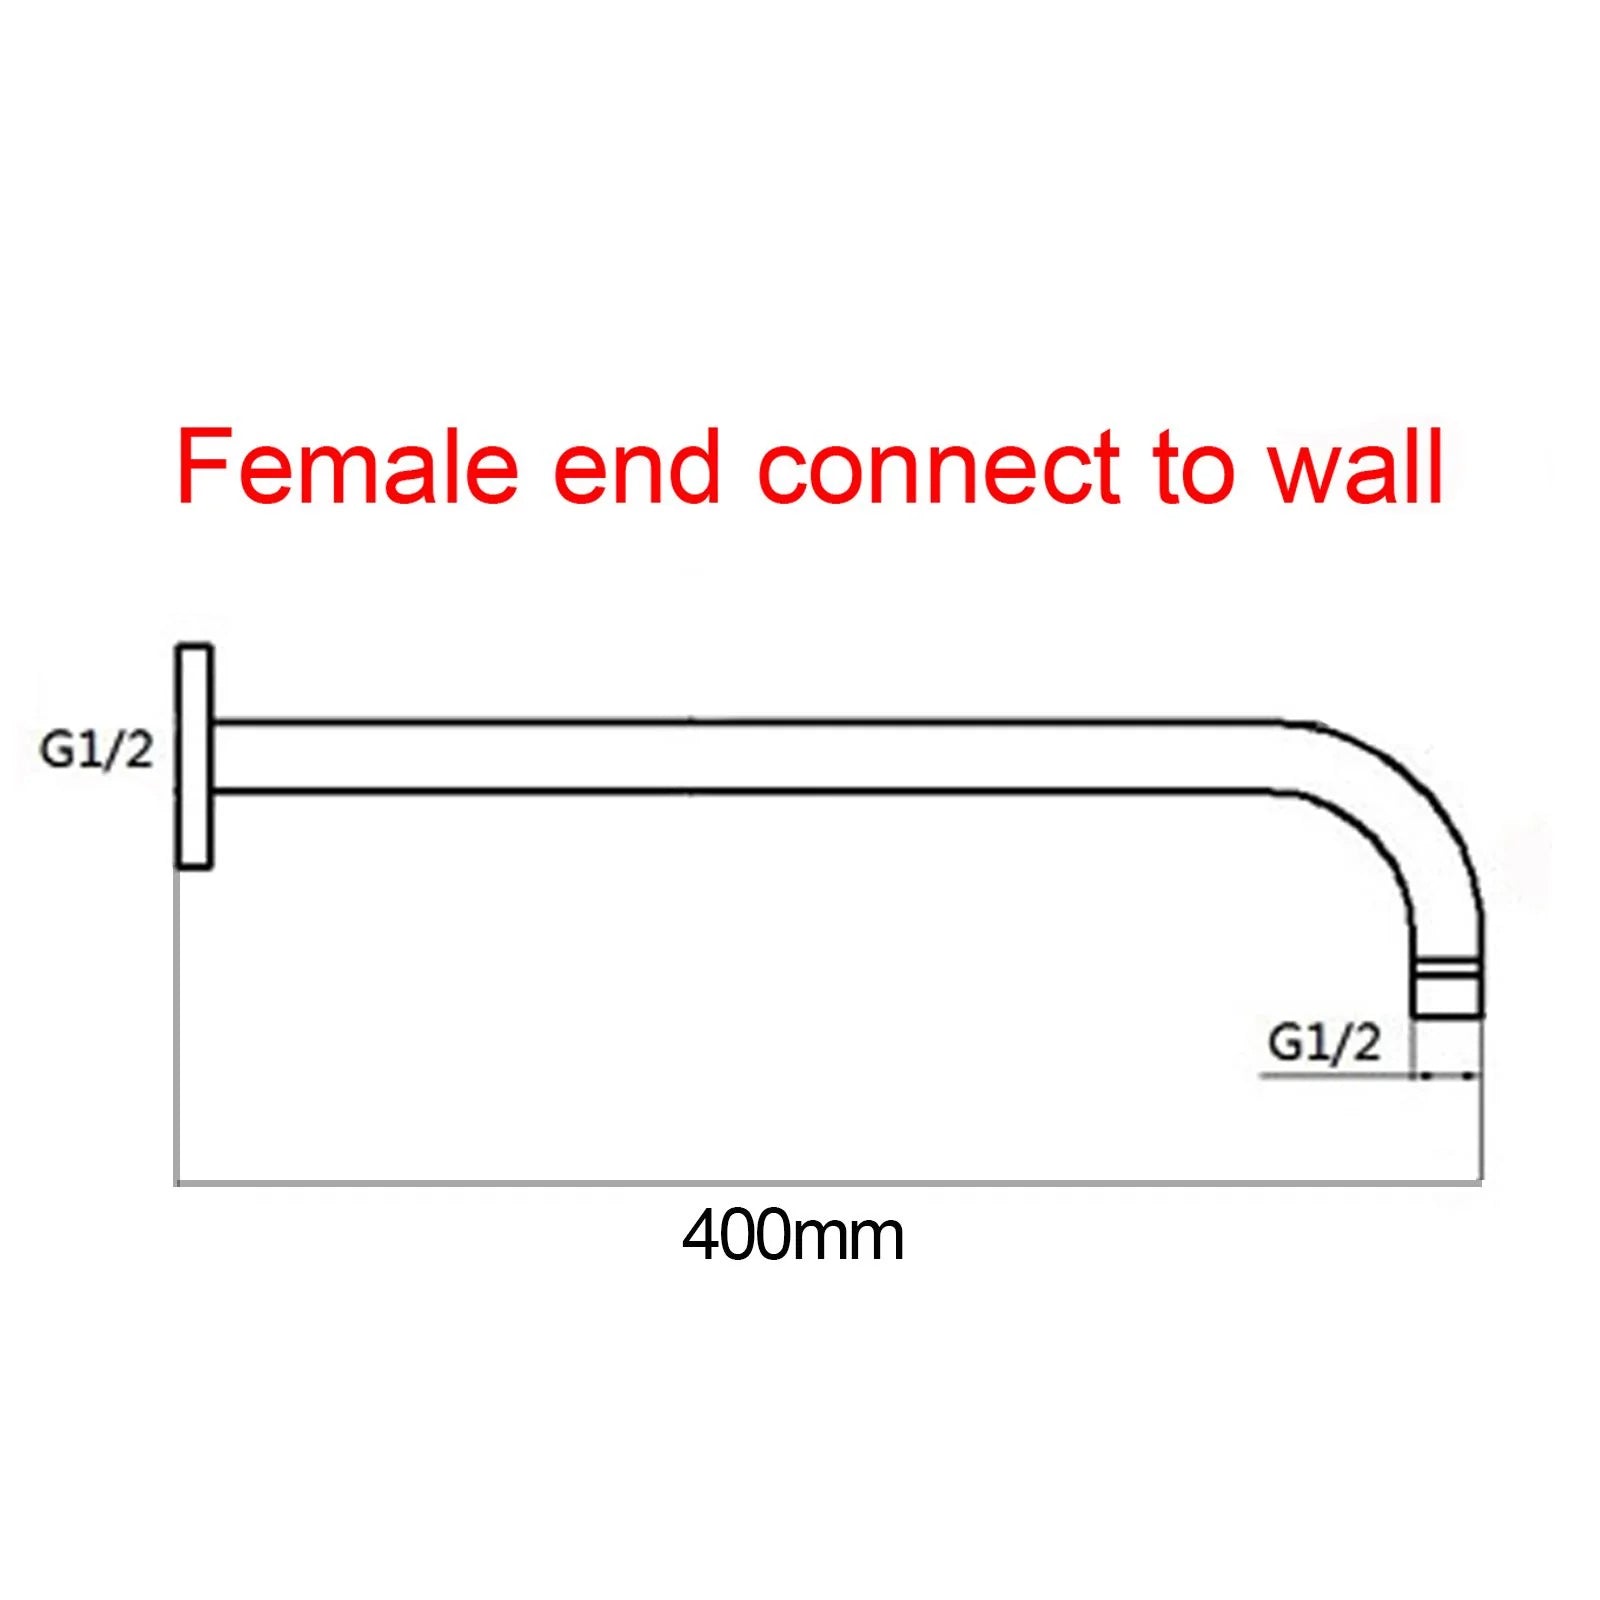 Stainless Steel Wall Shower Arm: 400mm Durable Round Design for Wall Mounting-Chrome-CH0108.SA